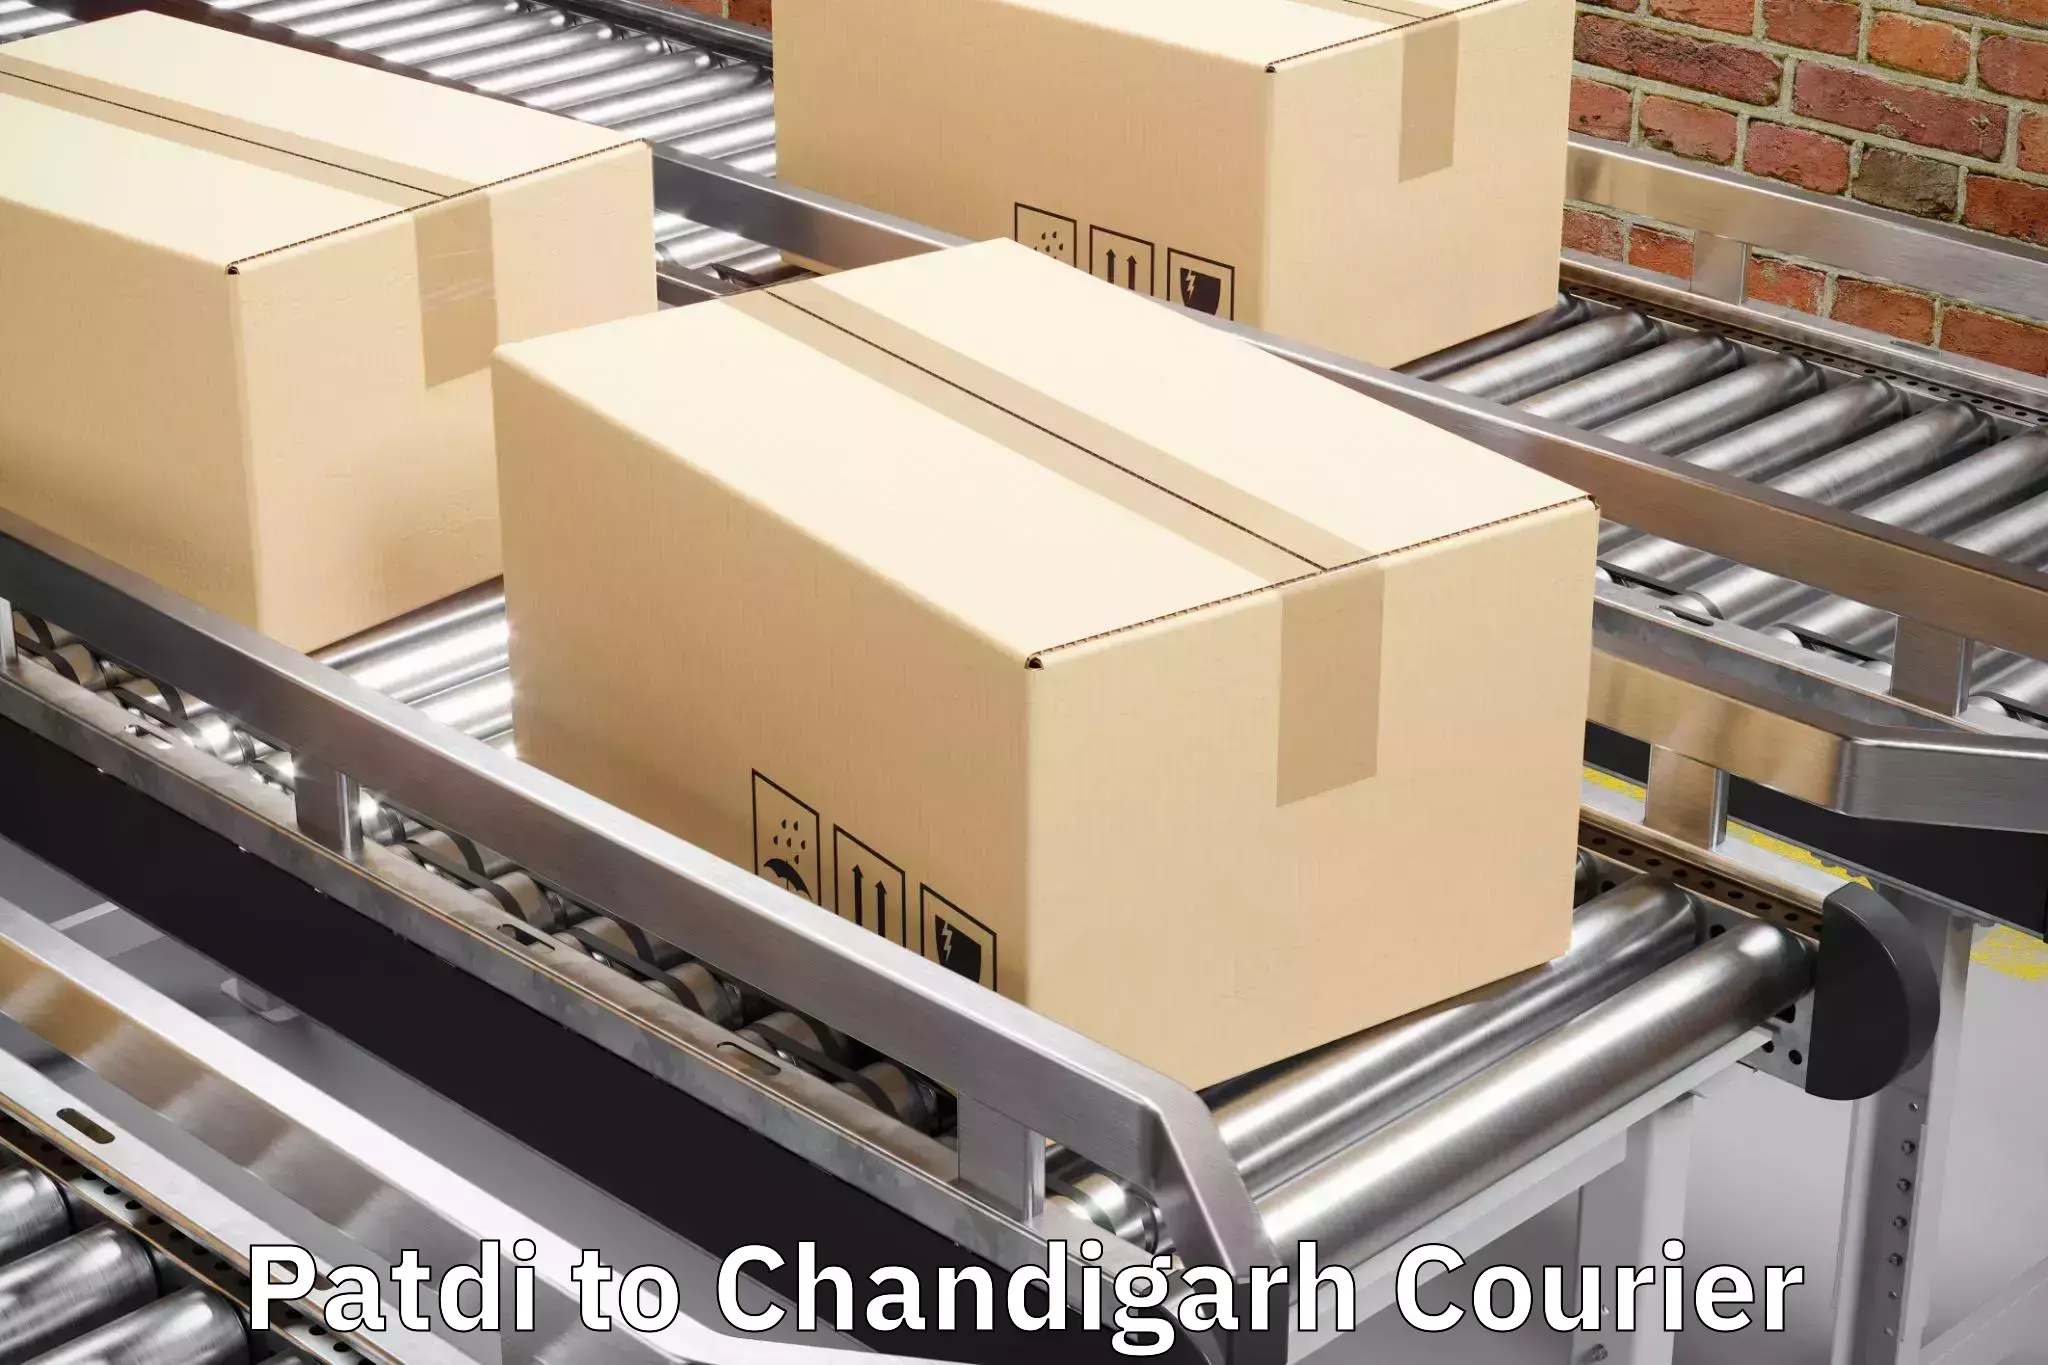 Luggage delivery app Patdi to Chandigarh